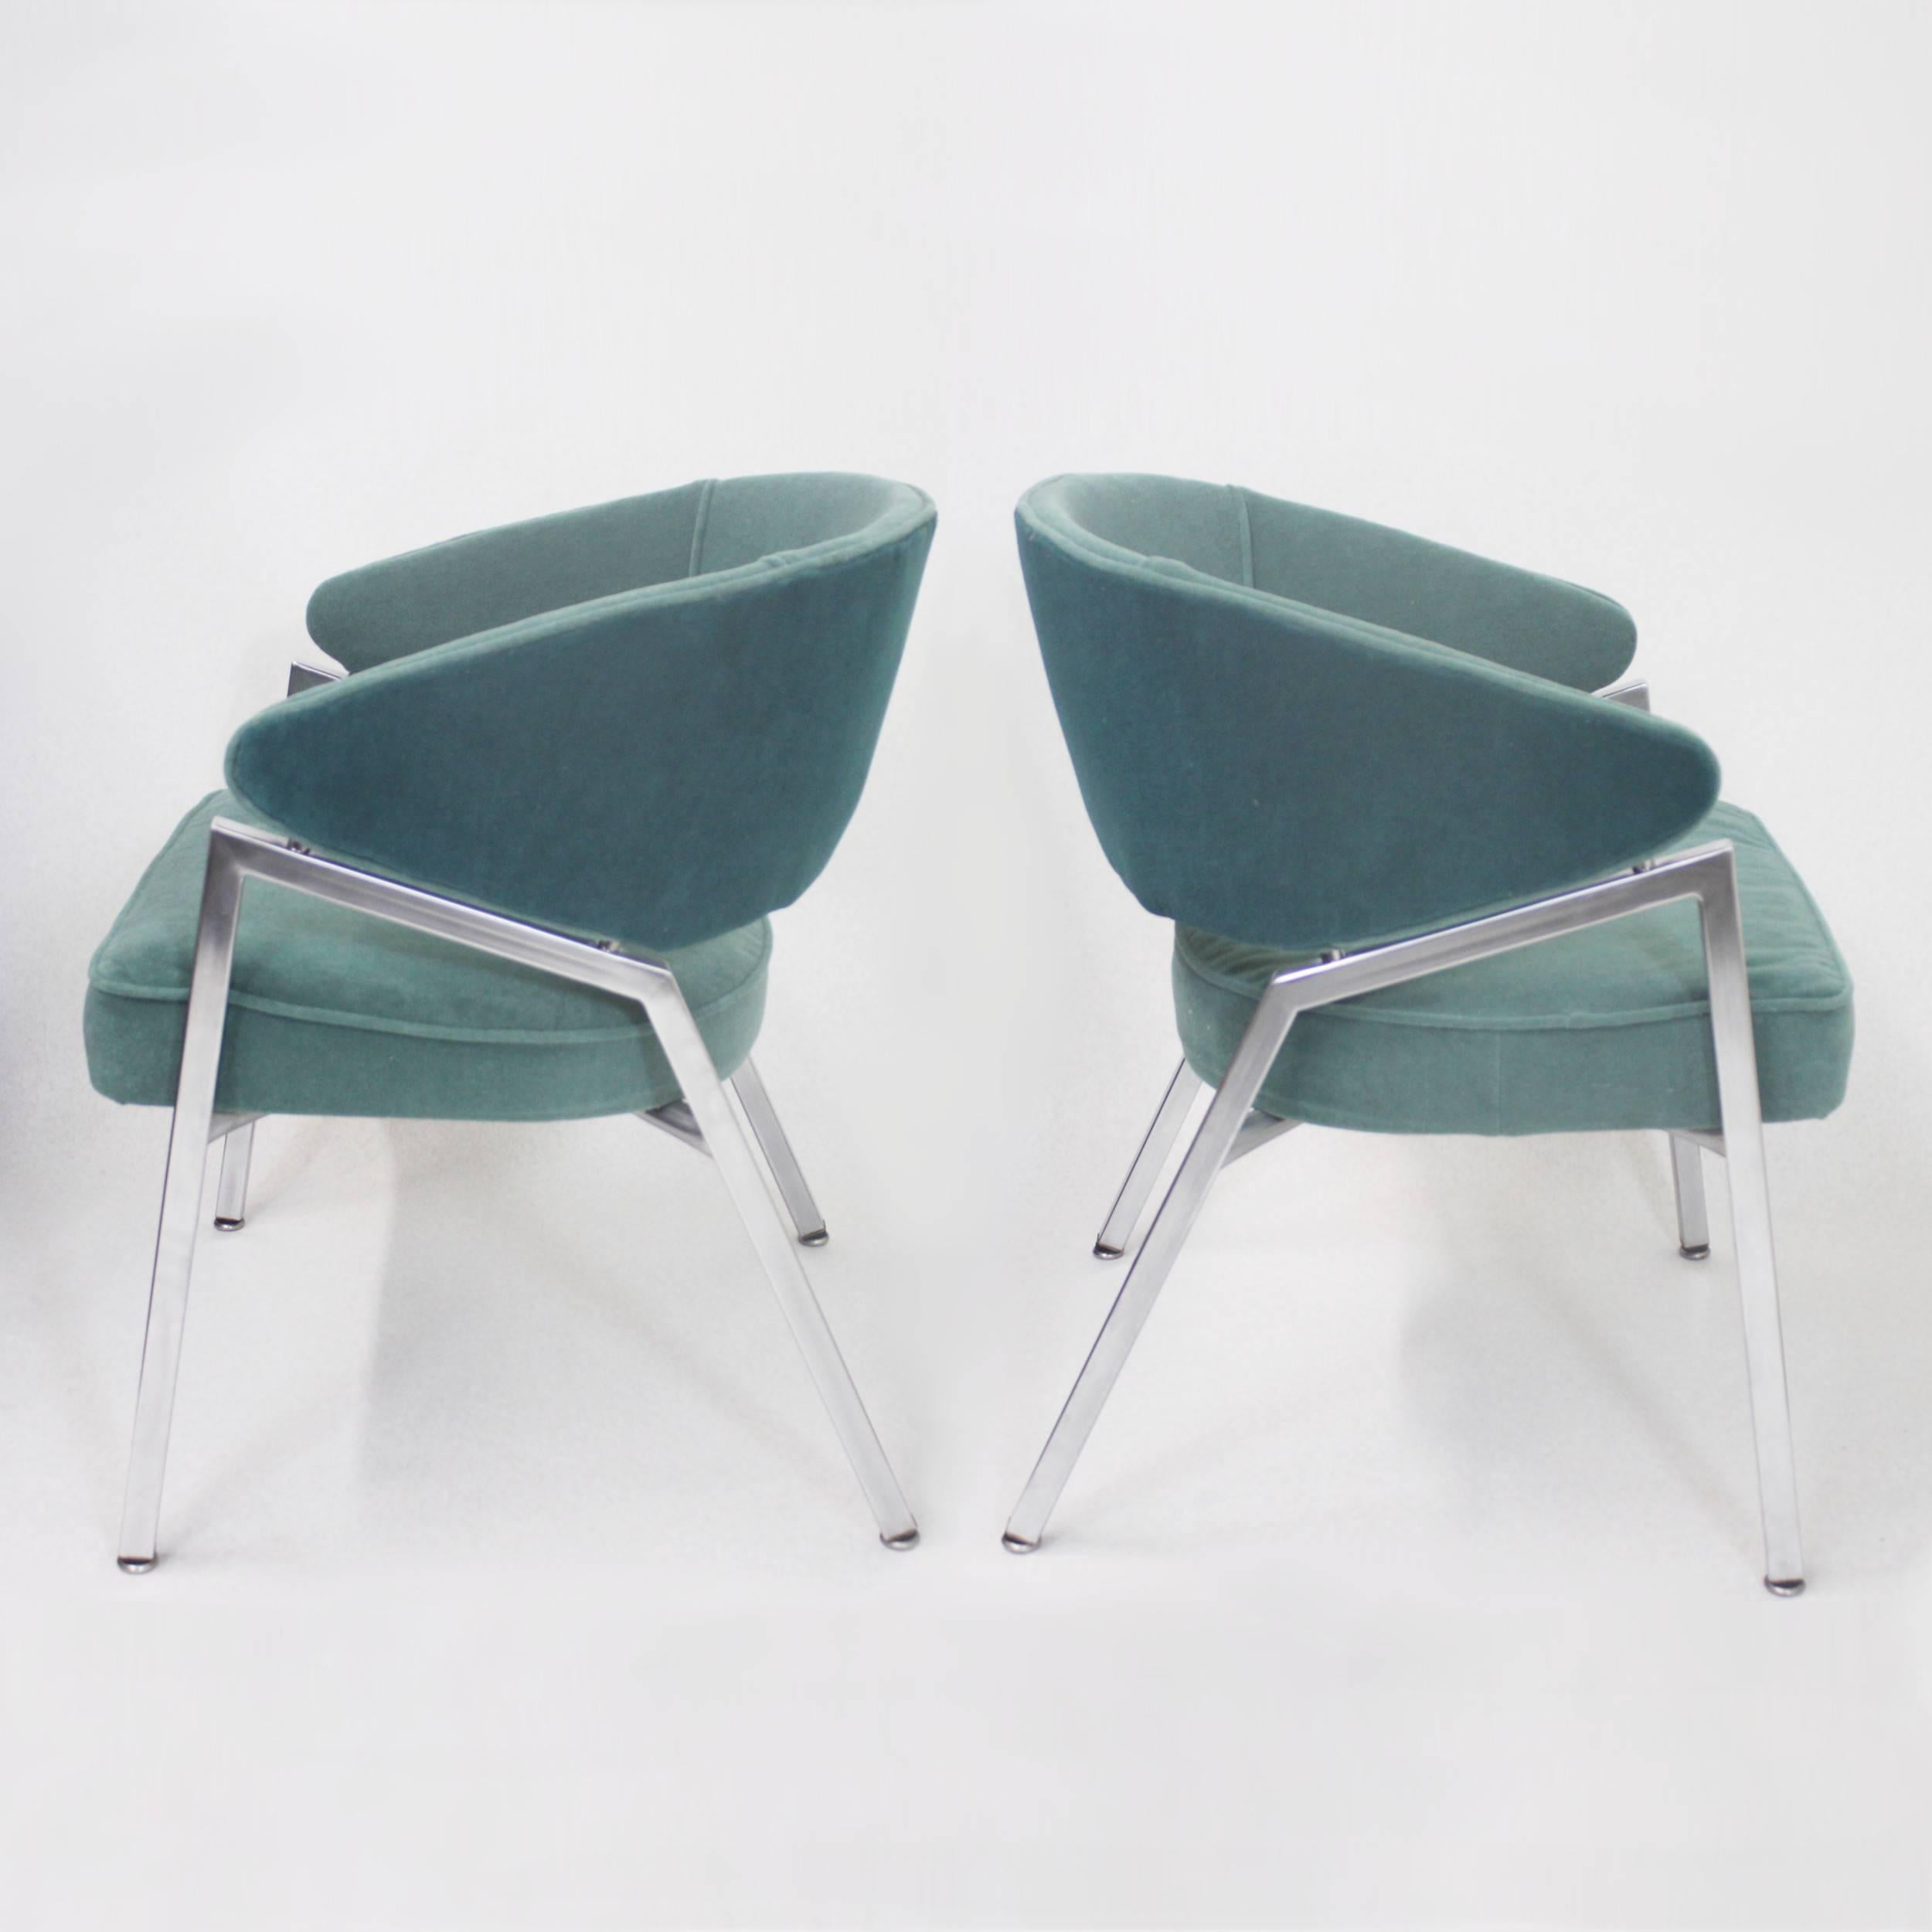 American Rare Pair of 1970s Mid-Century Modern Teal Green and Chrome Side Arm Chairs